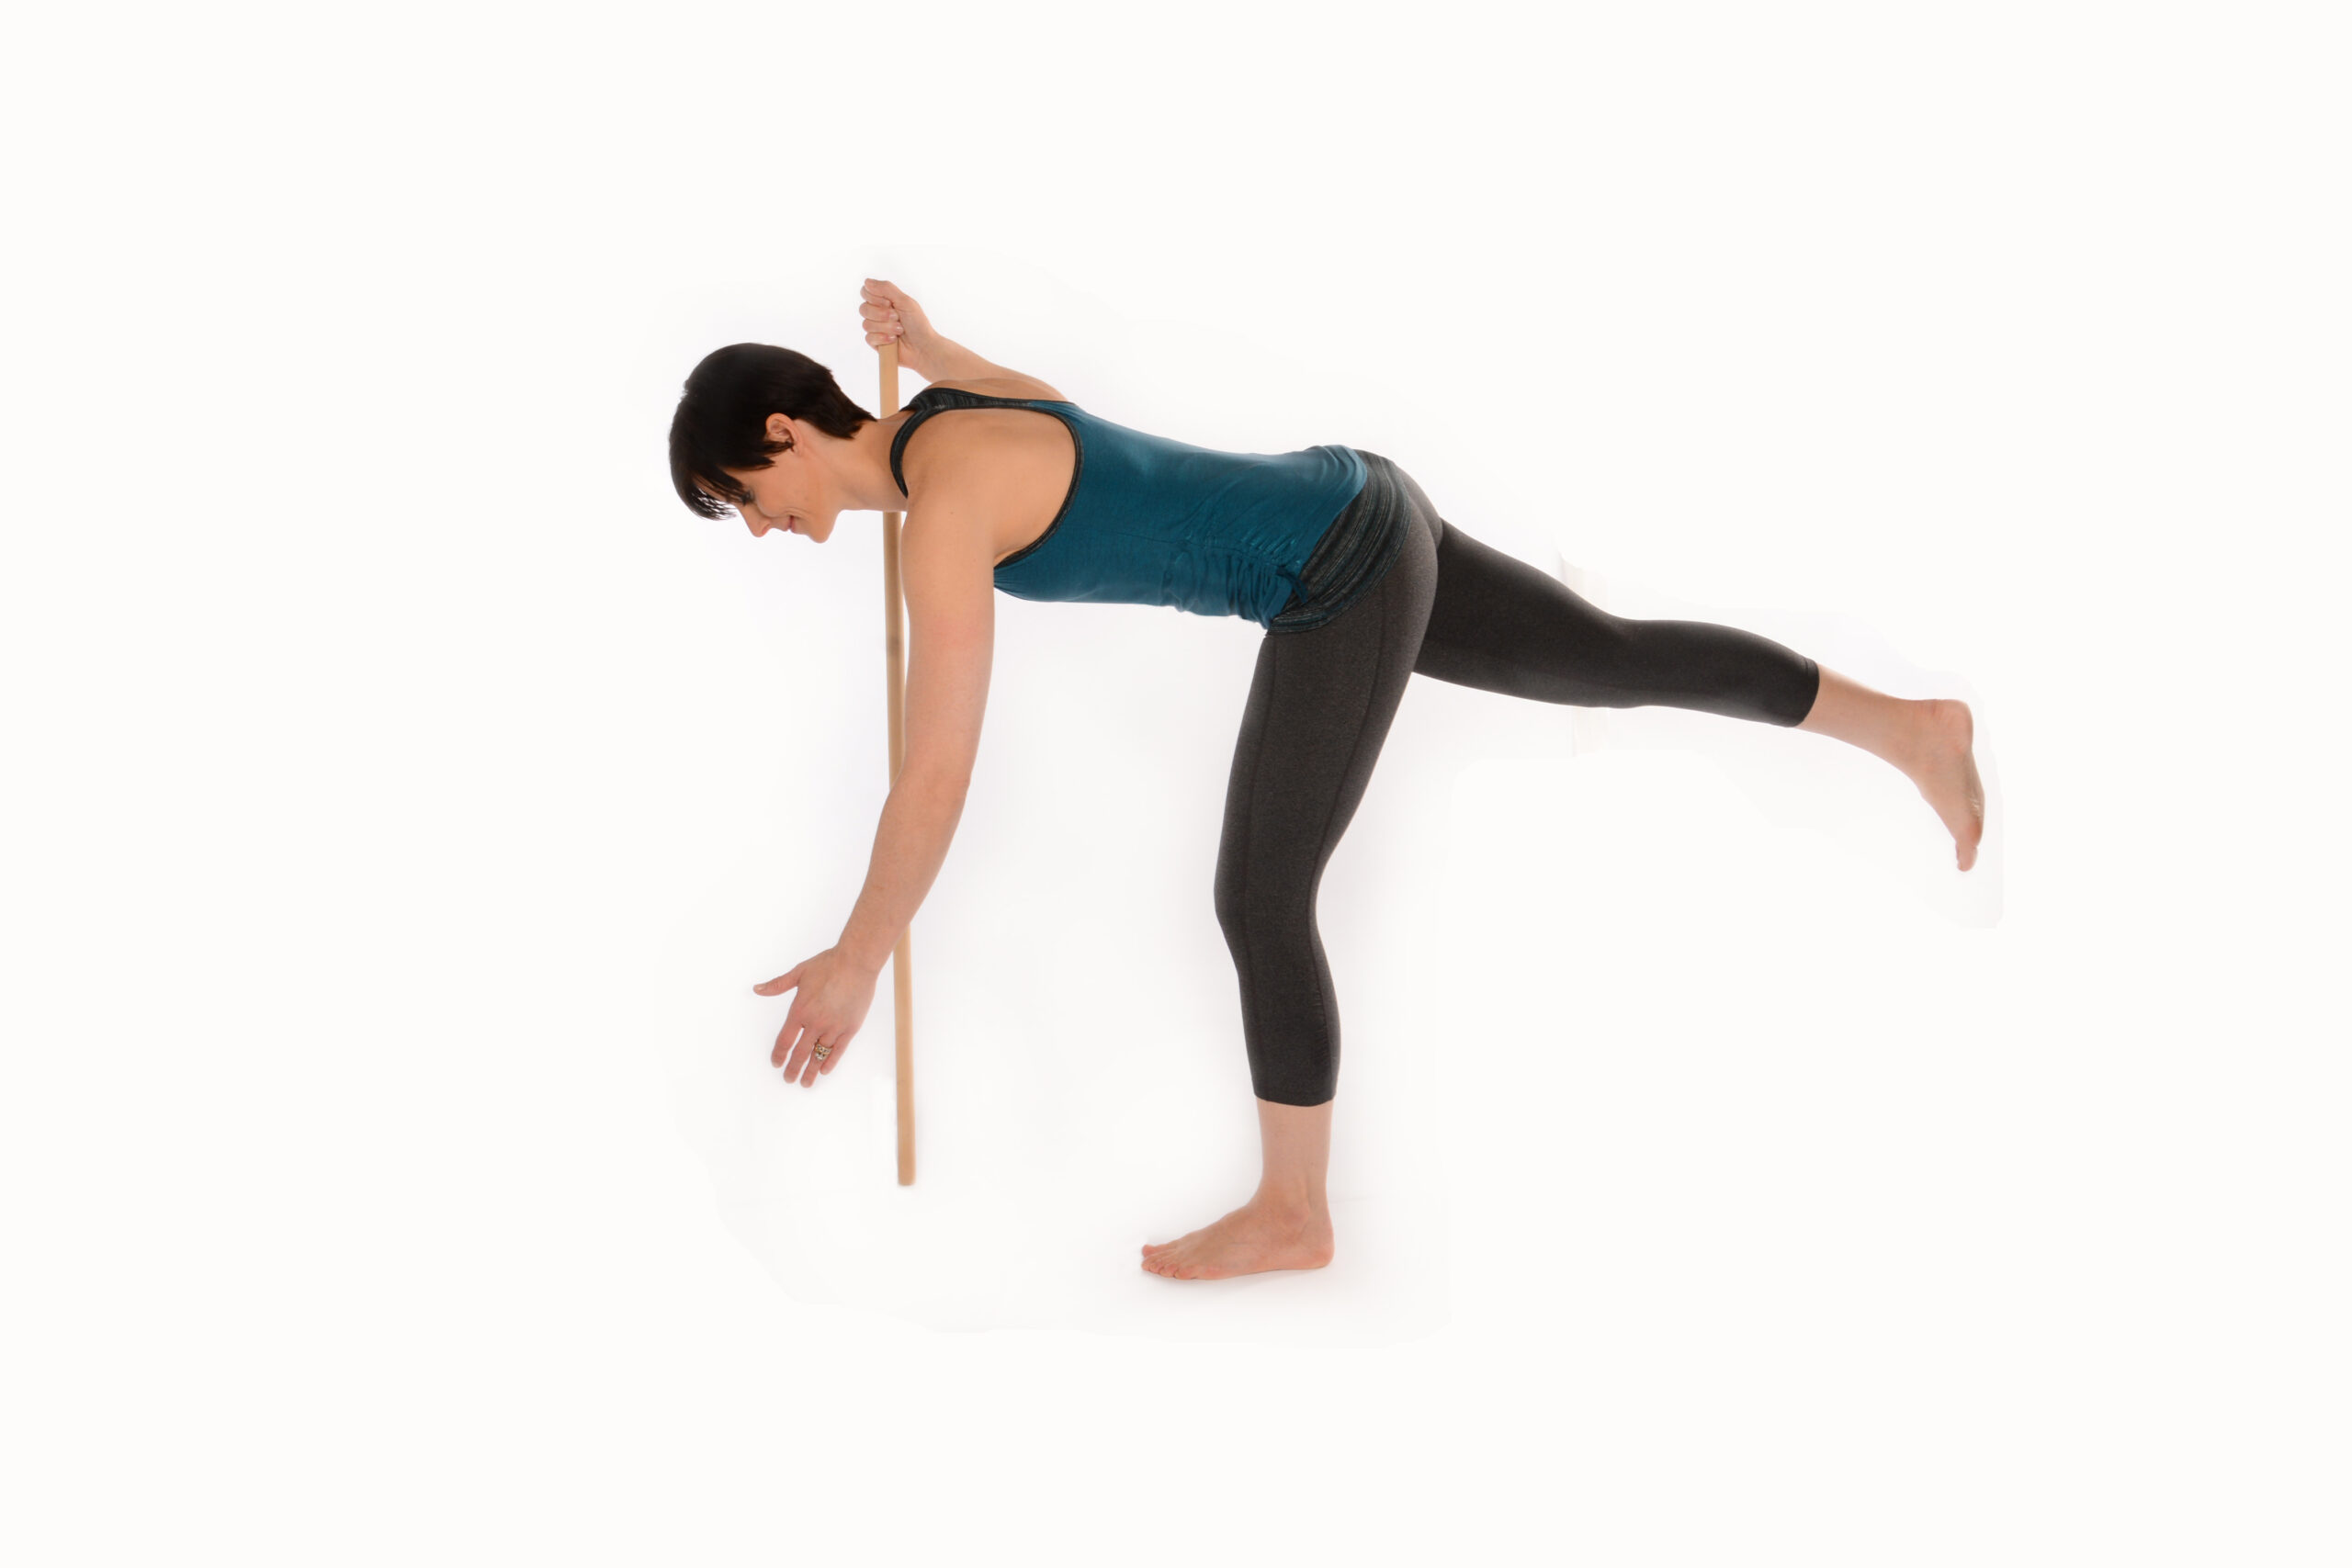 Add standing exercises at the beginning and end of your Pilates